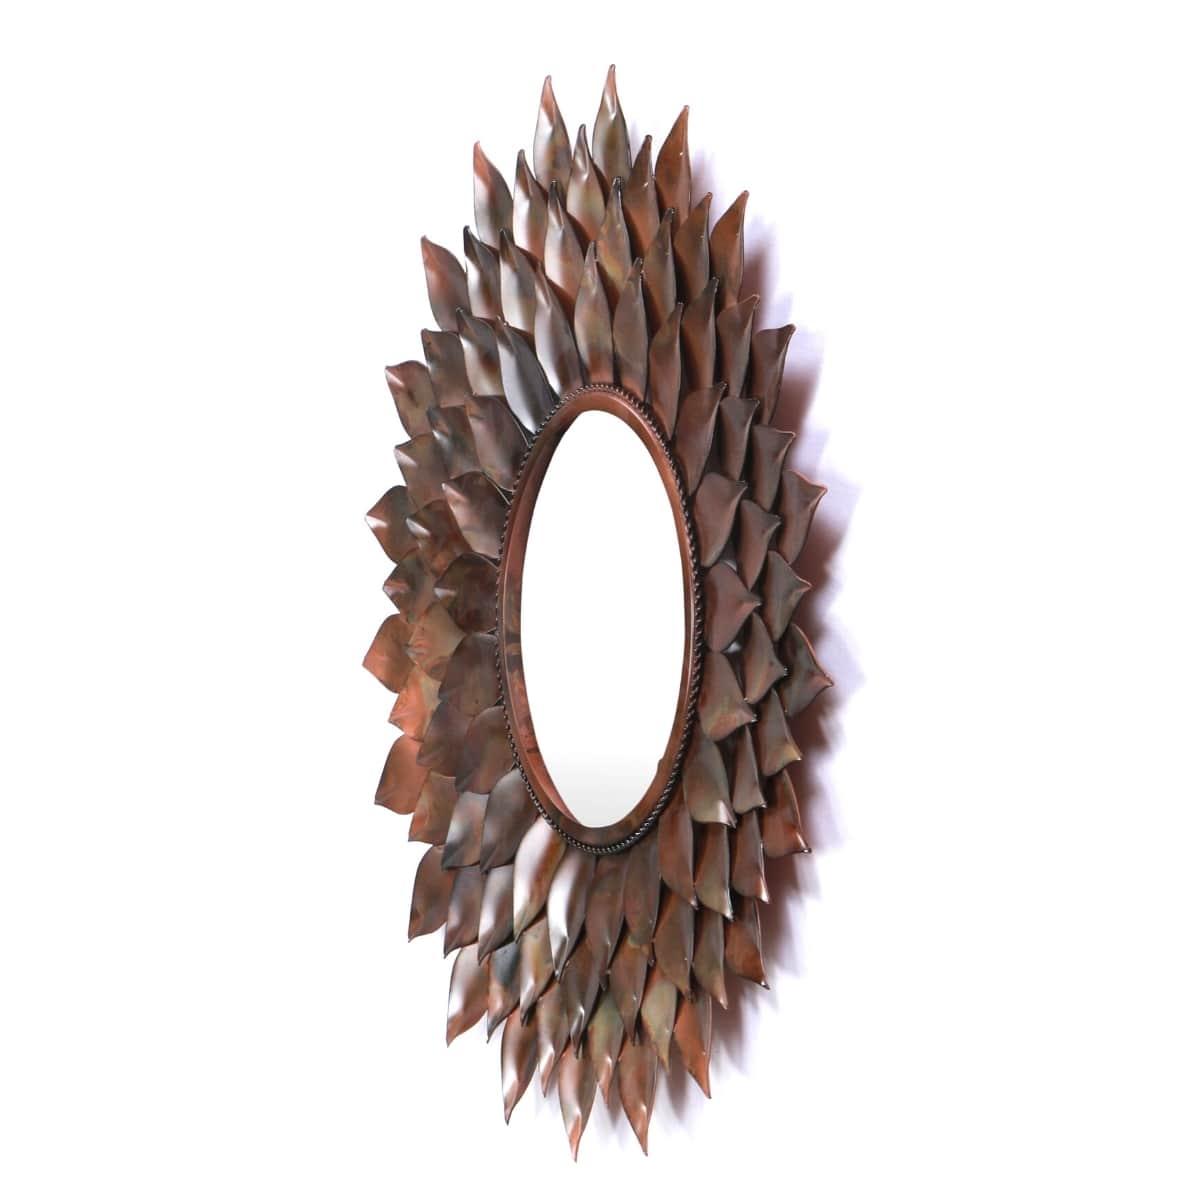 Drody Brass Sunflower Wall Mirror - Rustic Furniture Outlet